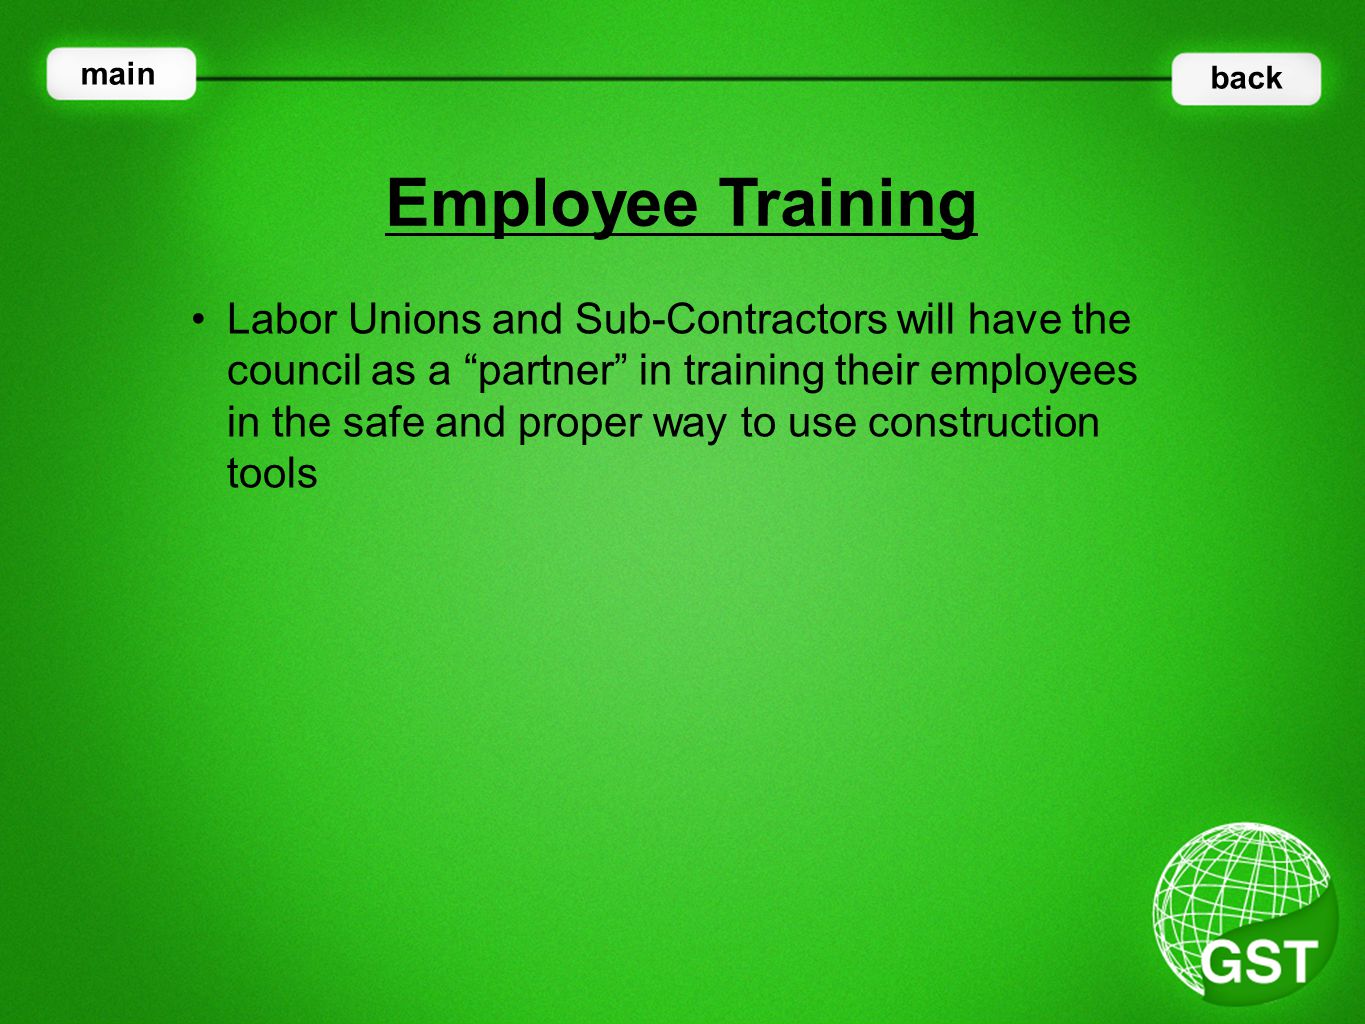 Labor Unions and Sub-Contractors will have the council as a partner in training their employees in the safe and proper way to use construction tools Employee Training main back